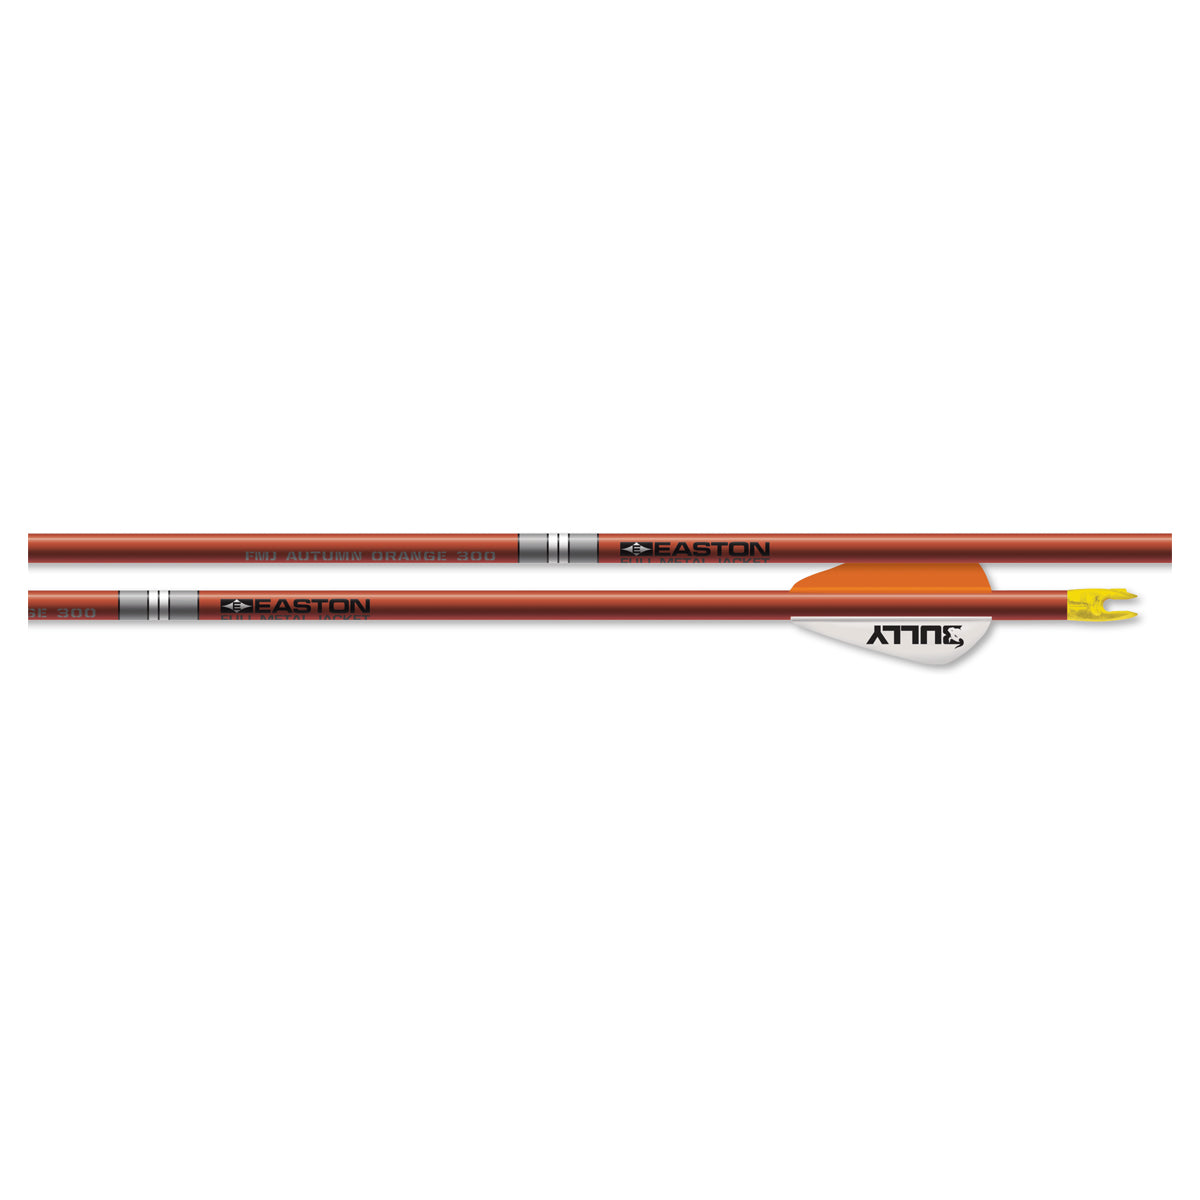 Easton FMJ 5MM Autumn Orange Limited Edition Pre-Fletched Arrow Shafts - 6 Count in  by GOHUNT | Easton - GOHUNT Shop